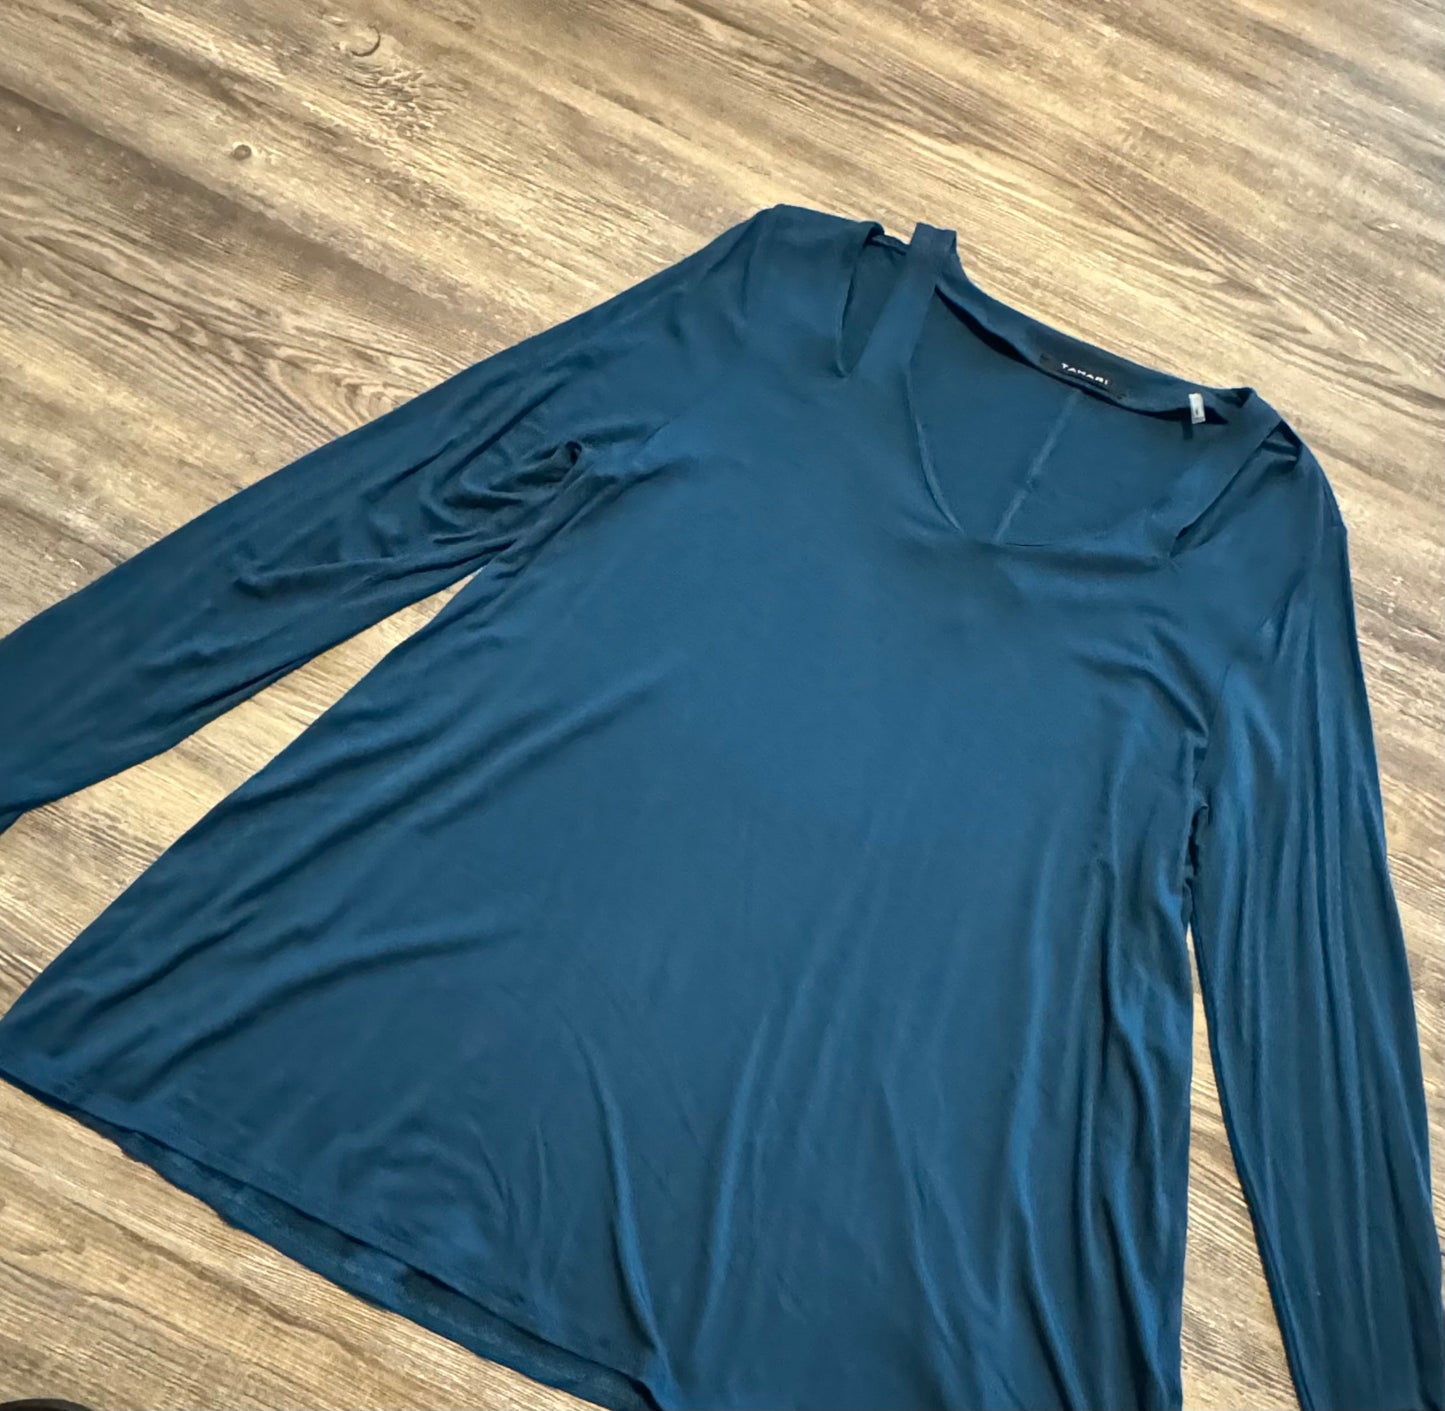 Top Long Sleeve By Tahari By Arthur Levine  Size: M